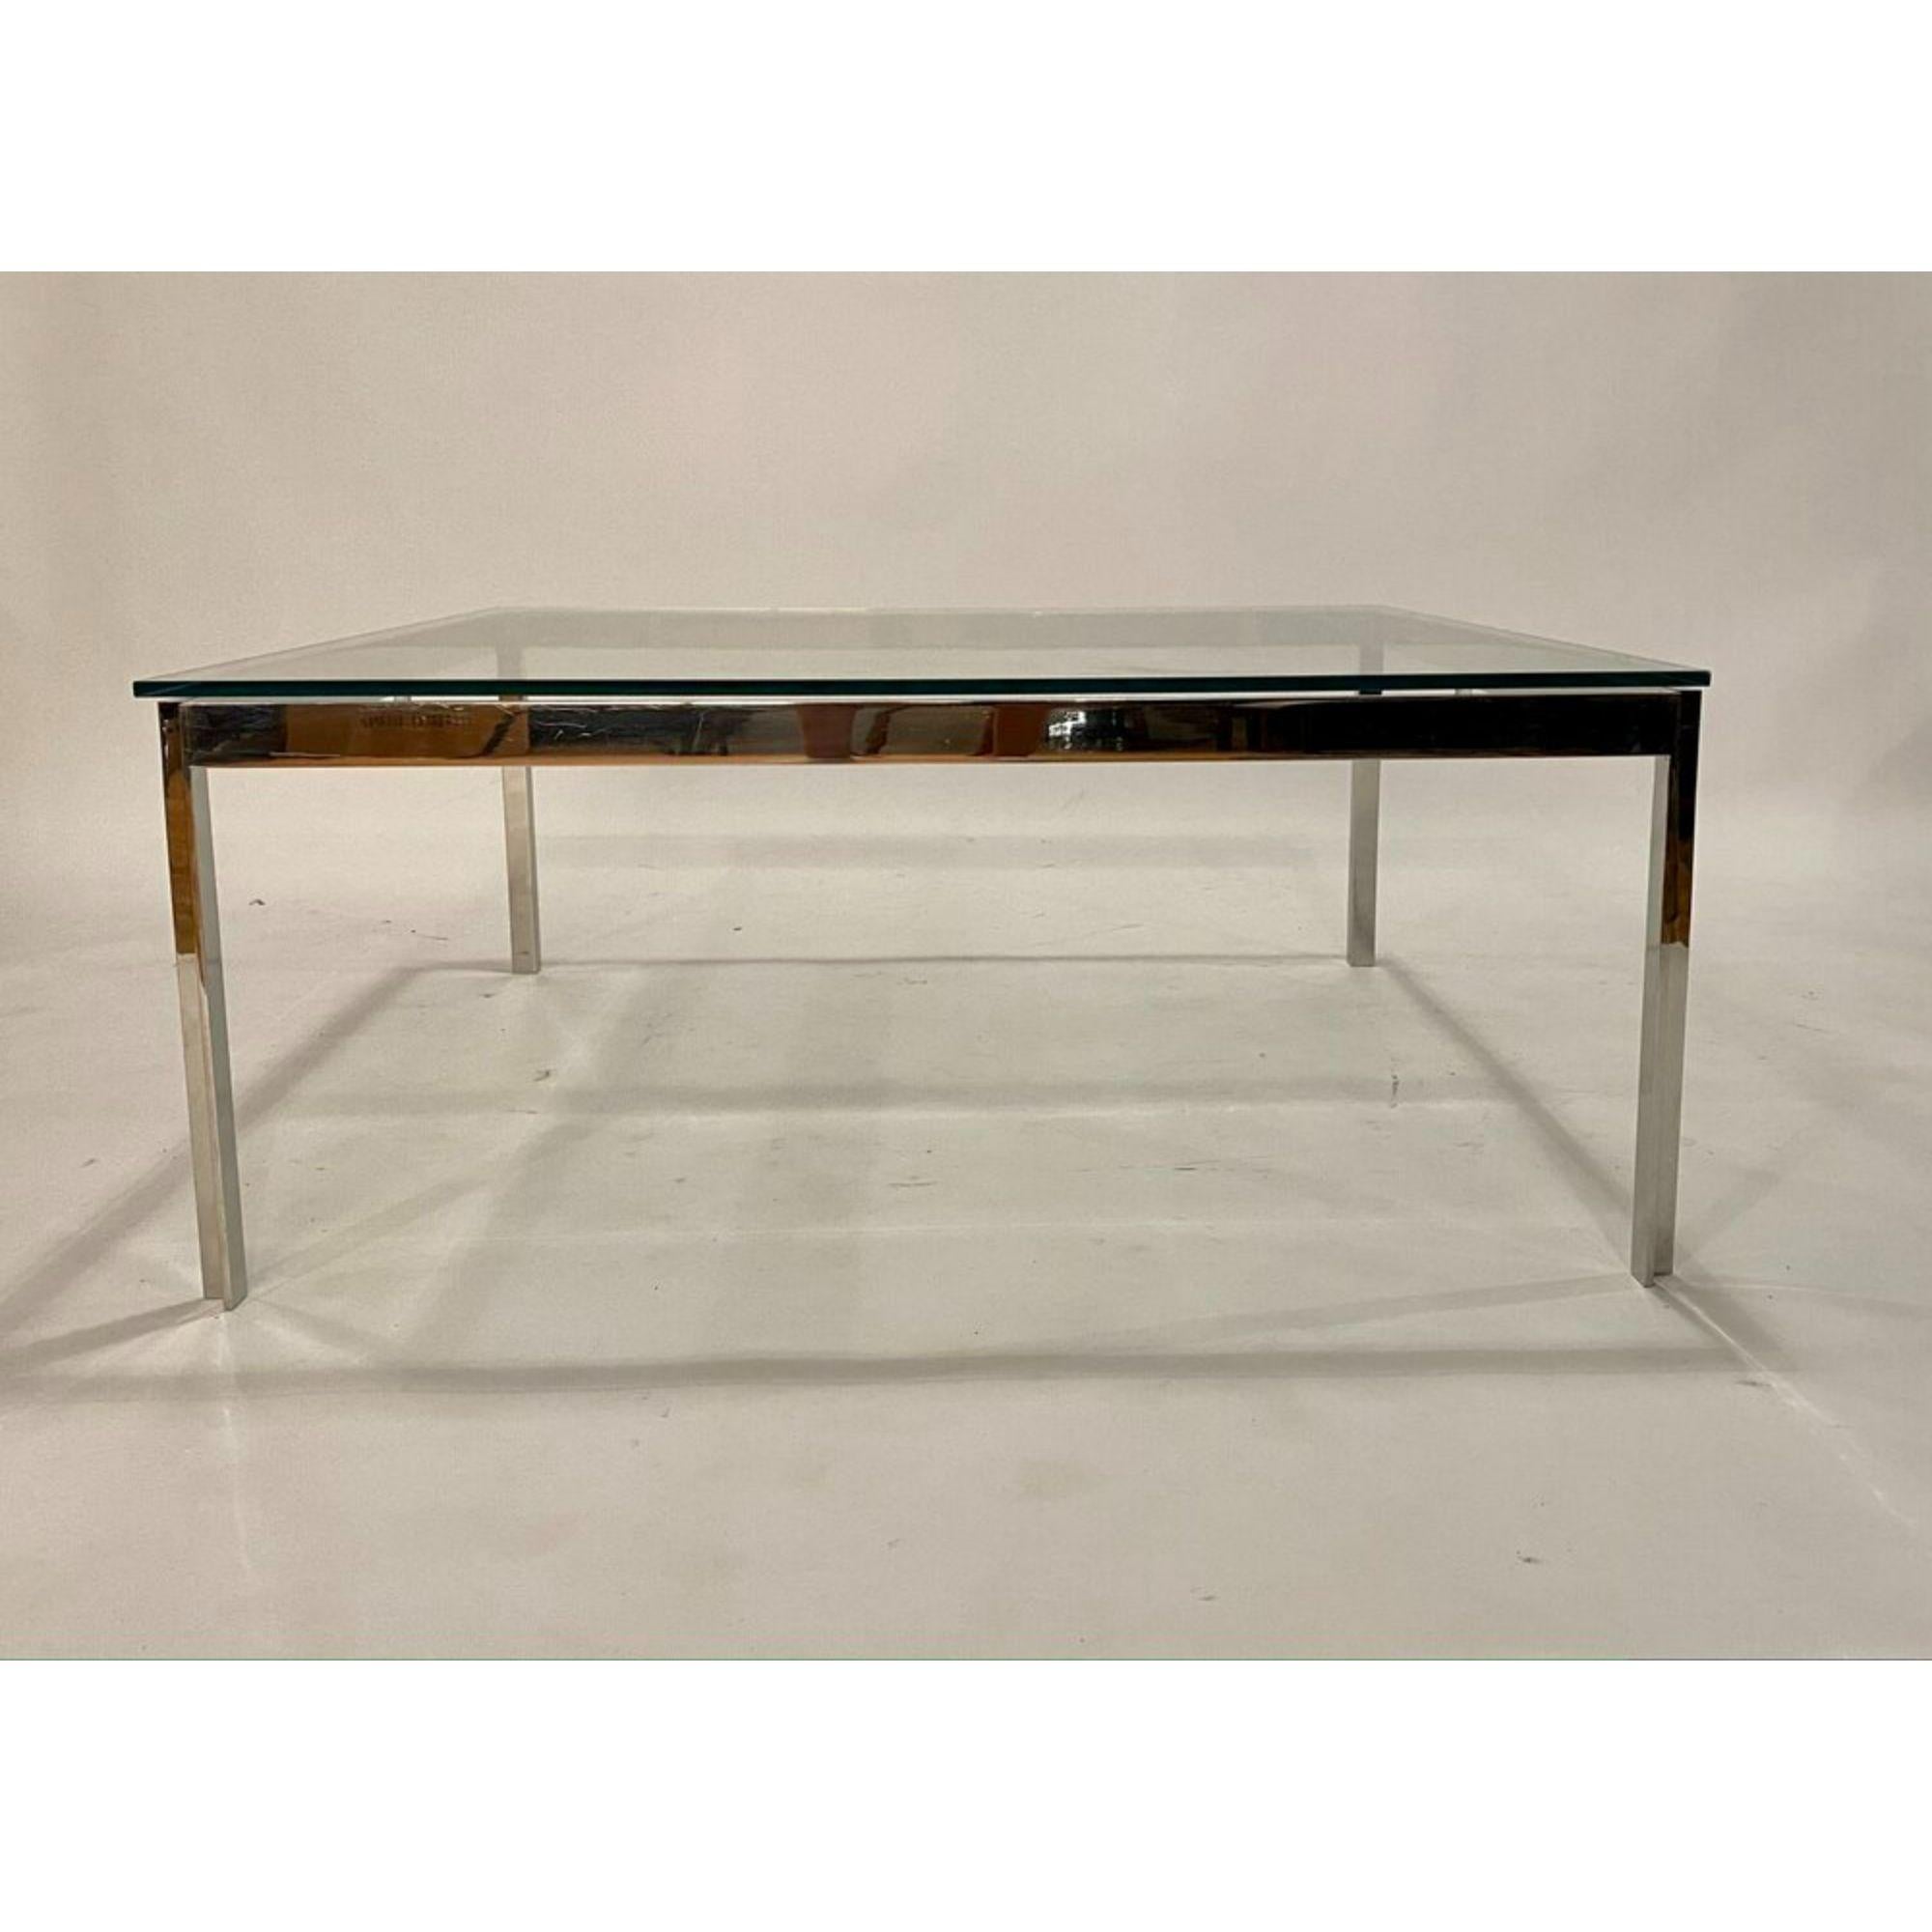 Vintage modern steel and glass square coffee table in the style of Milo Baughman or Knoll crafted in knife edge corners.

Additional Information:
Materials: Chrome, Glass
Color: Chrome
Style: Mid-Century Modern, Minimalist Modern
Style After: 